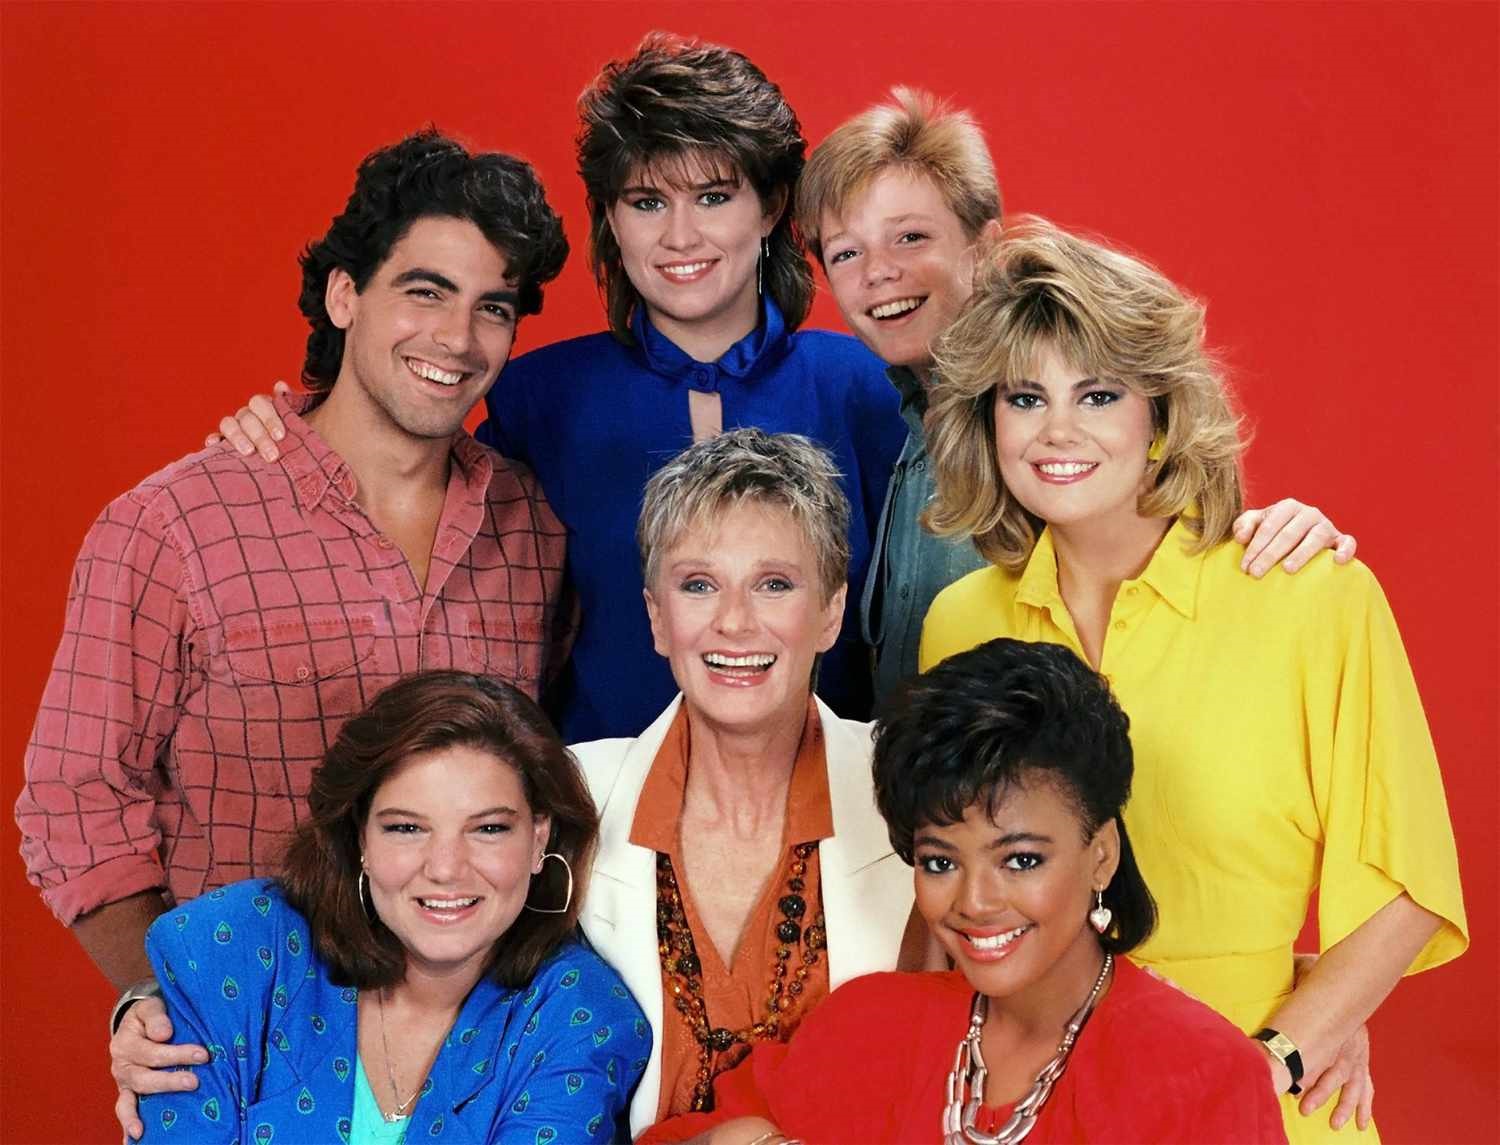 Unforgettable Faces: The Facts of Life Cast Updates